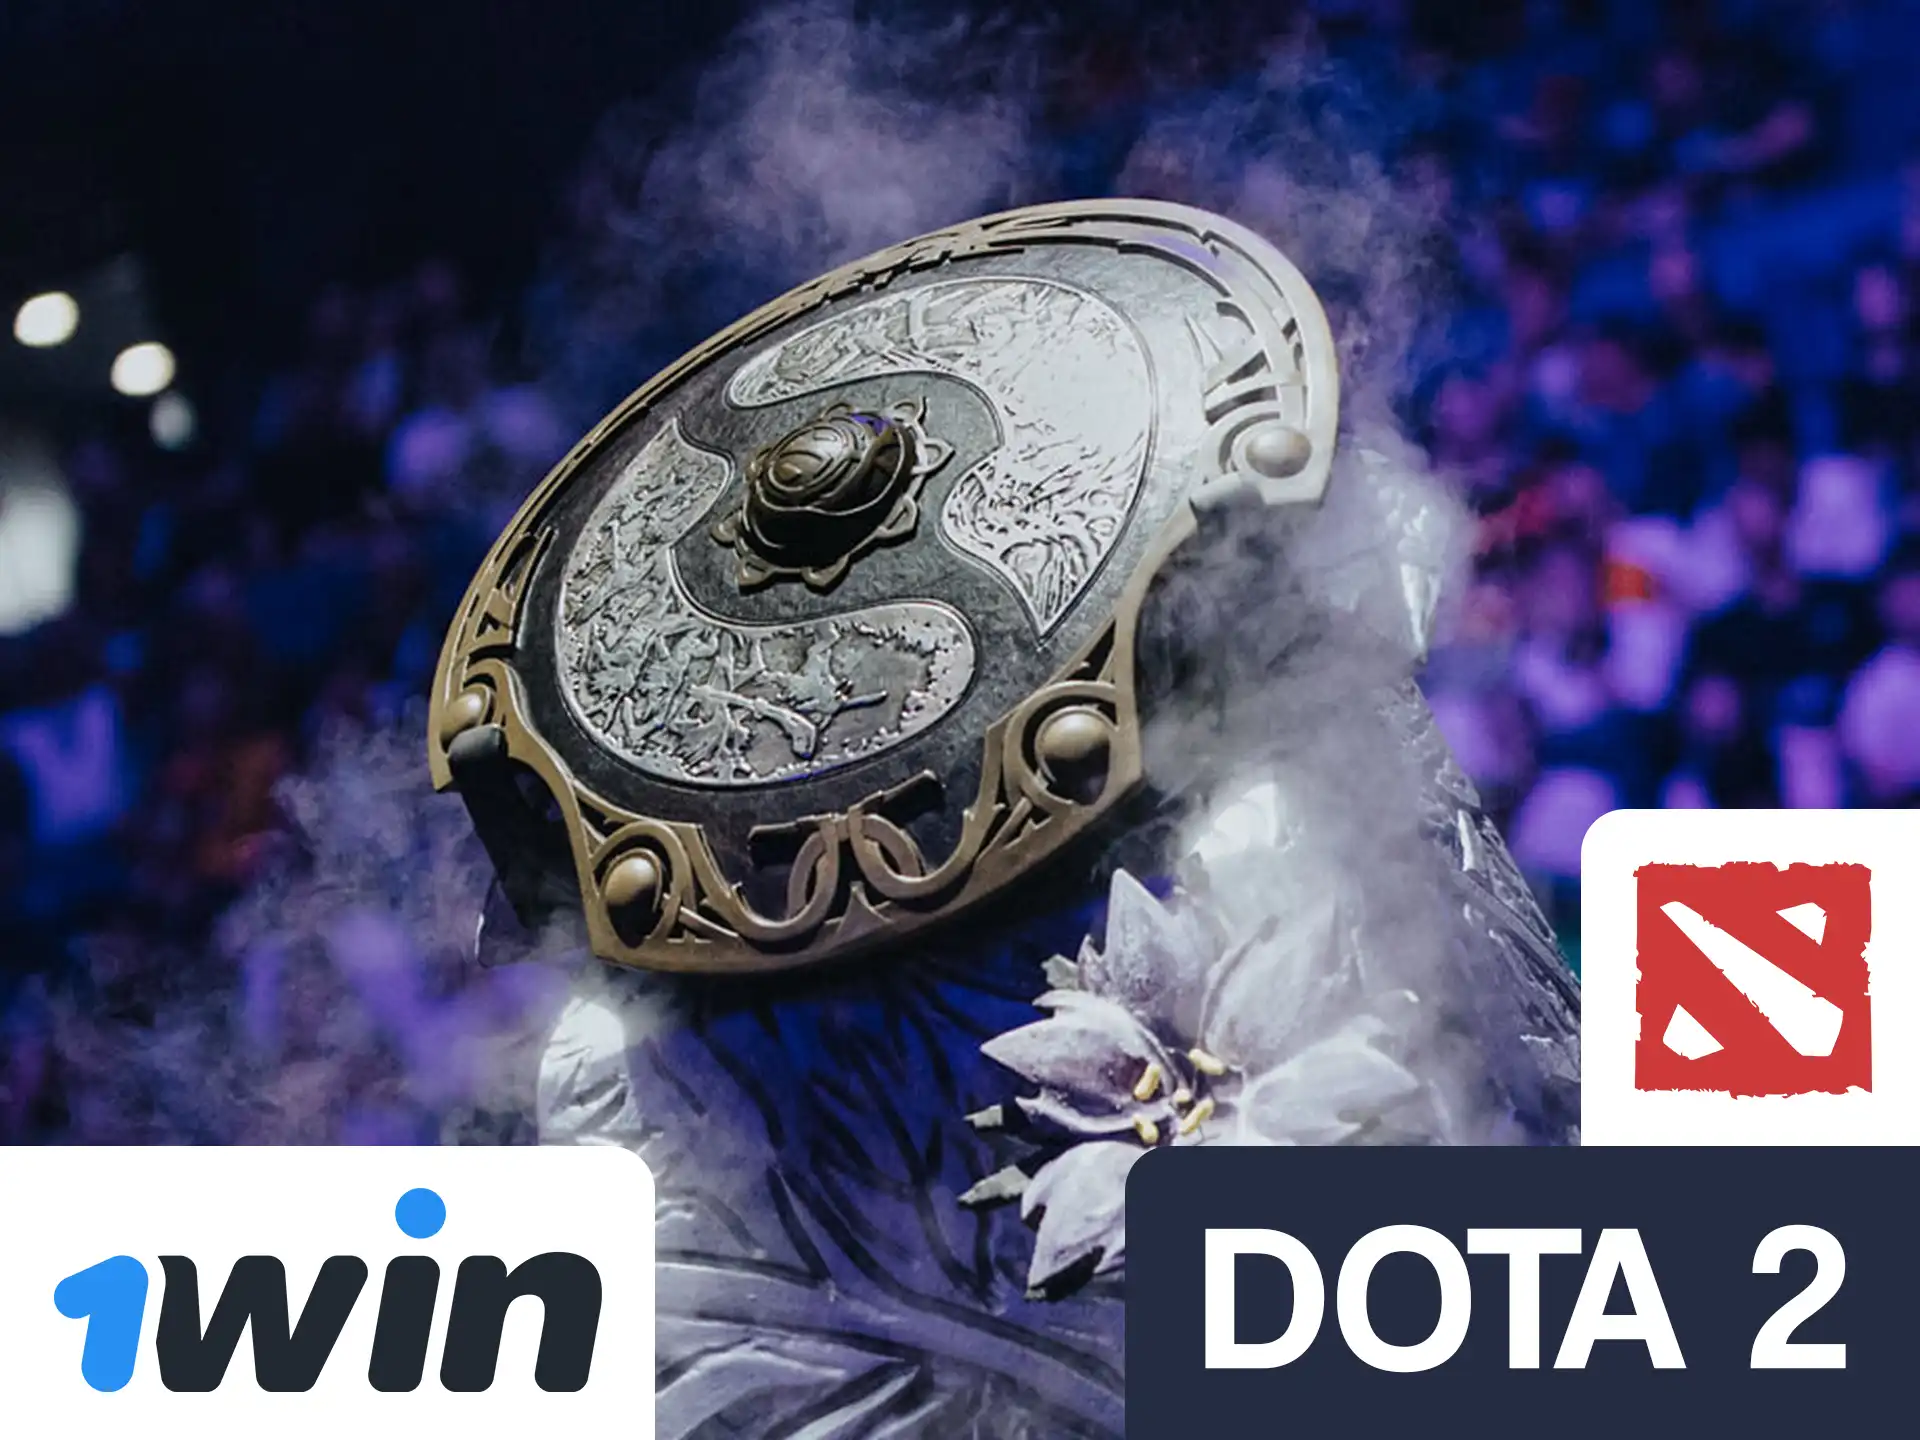 Bet on biggest Dota 2 tournament at 1win.